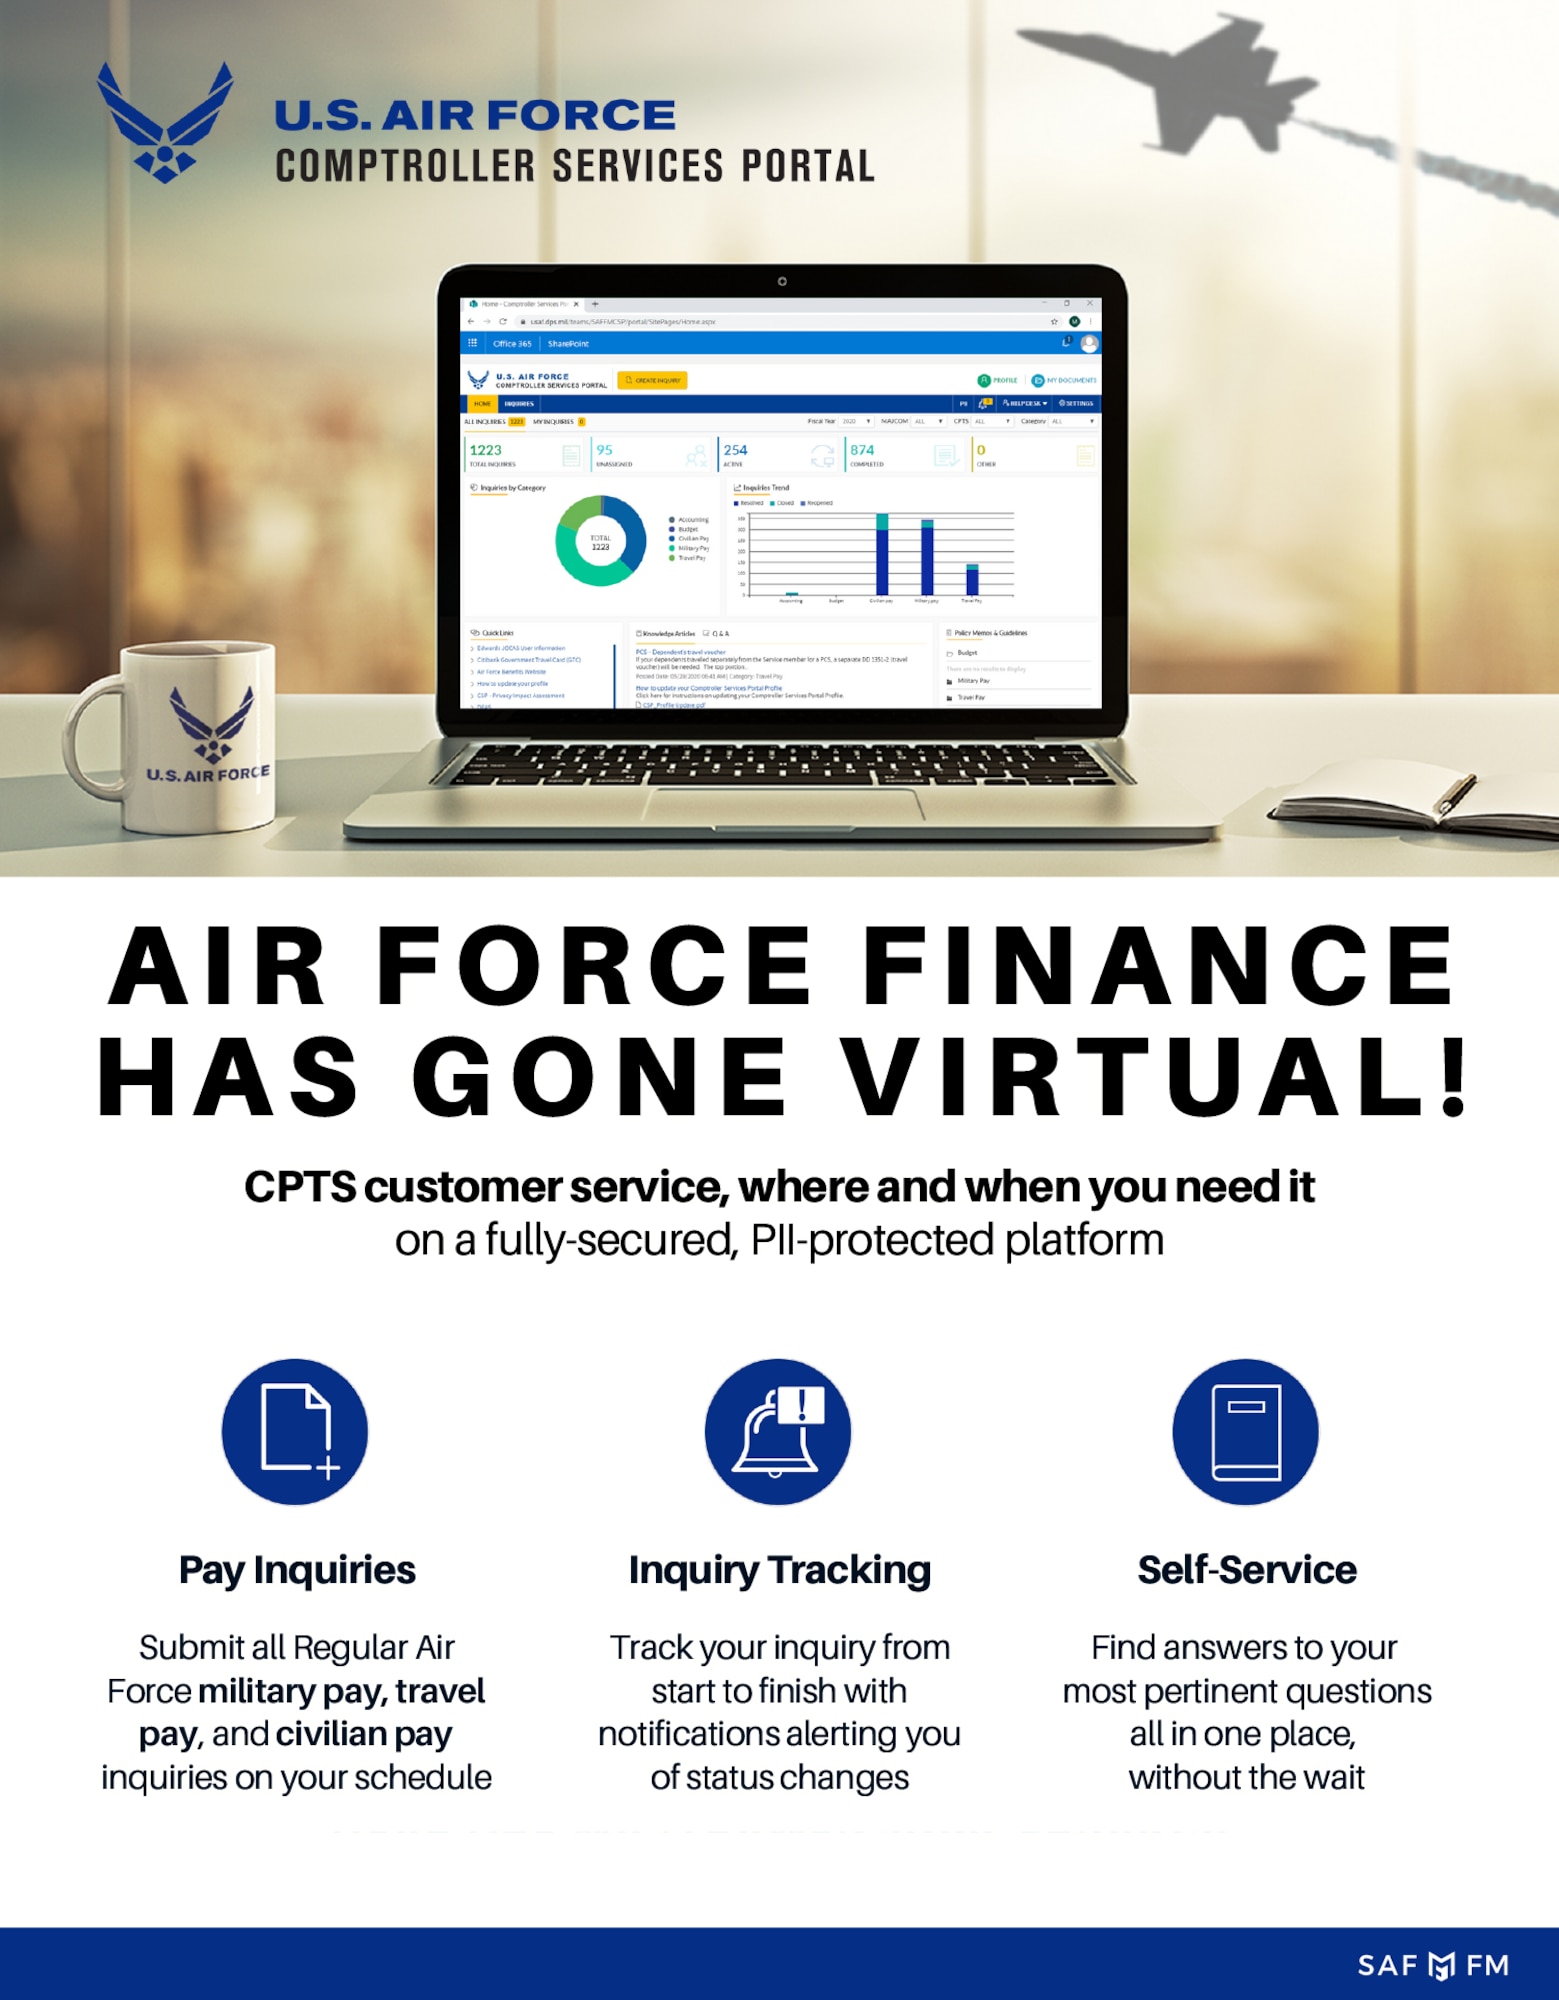 The U.S. Air Force Comptroller Service Portal will provide a virtual means for service members to access finance related tasks that are similar to working with finance technicians in person.